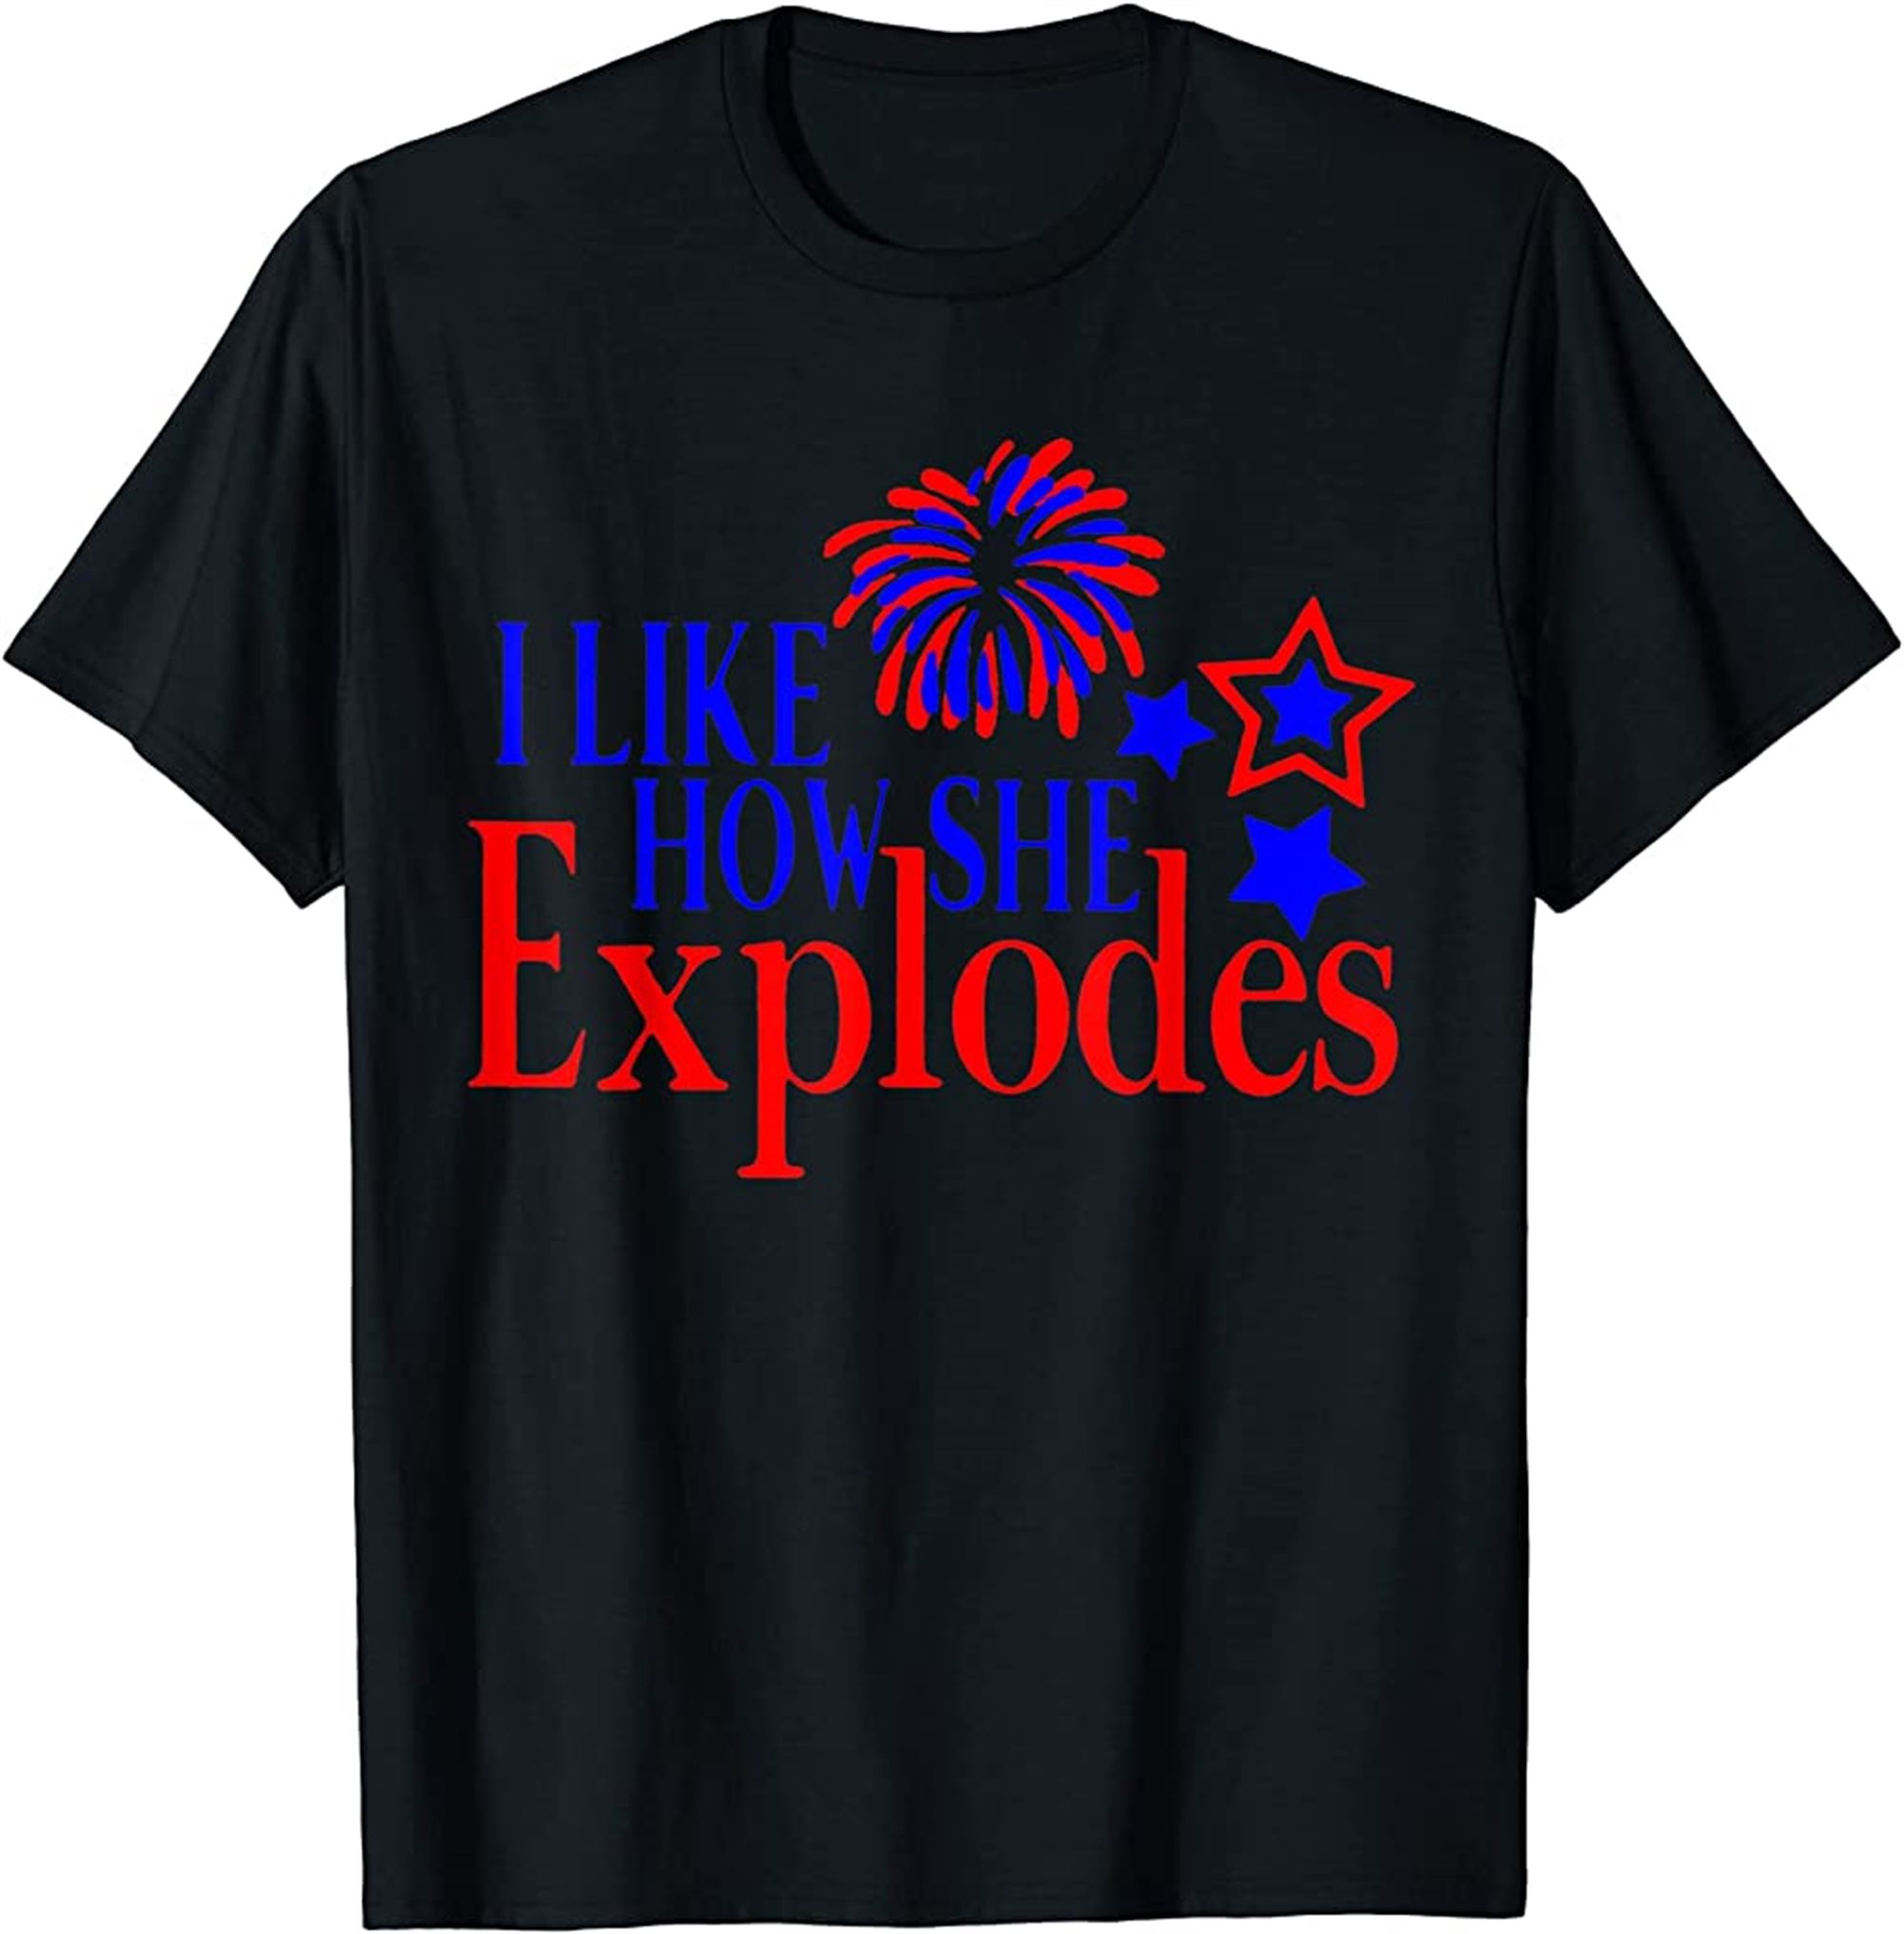 I Like How She Explodes Funny 4th Of July Matching Couple T-shirt Size Up To 5xl